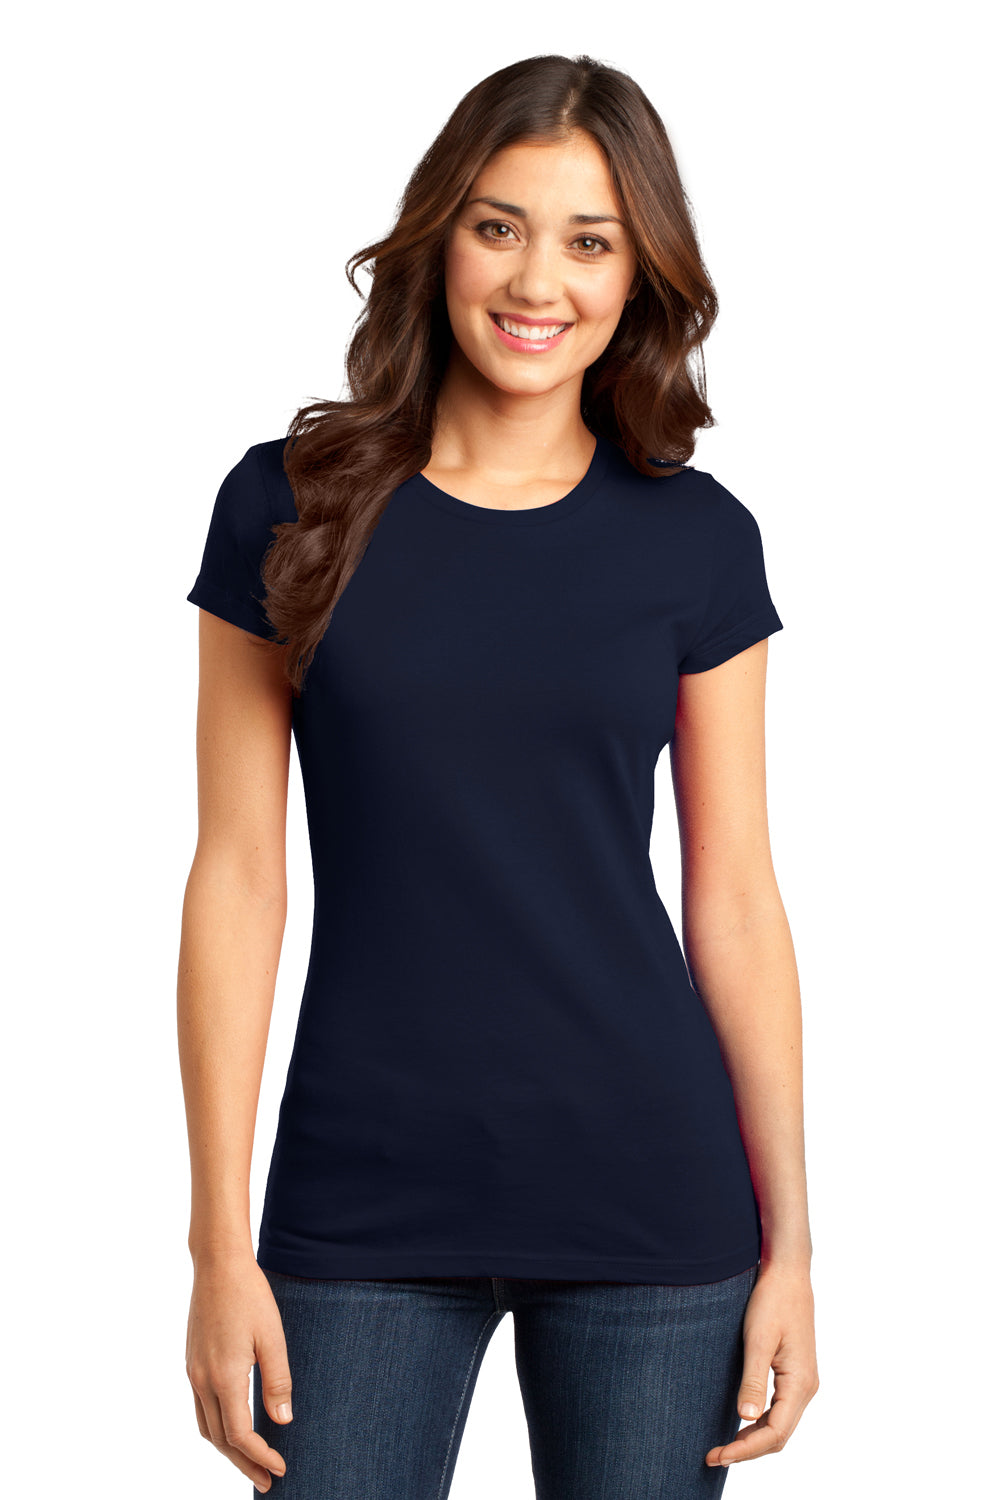 District DT6001 Womens Very Important Short Sleeve Crewneck T-Shirt Navy Blue Front